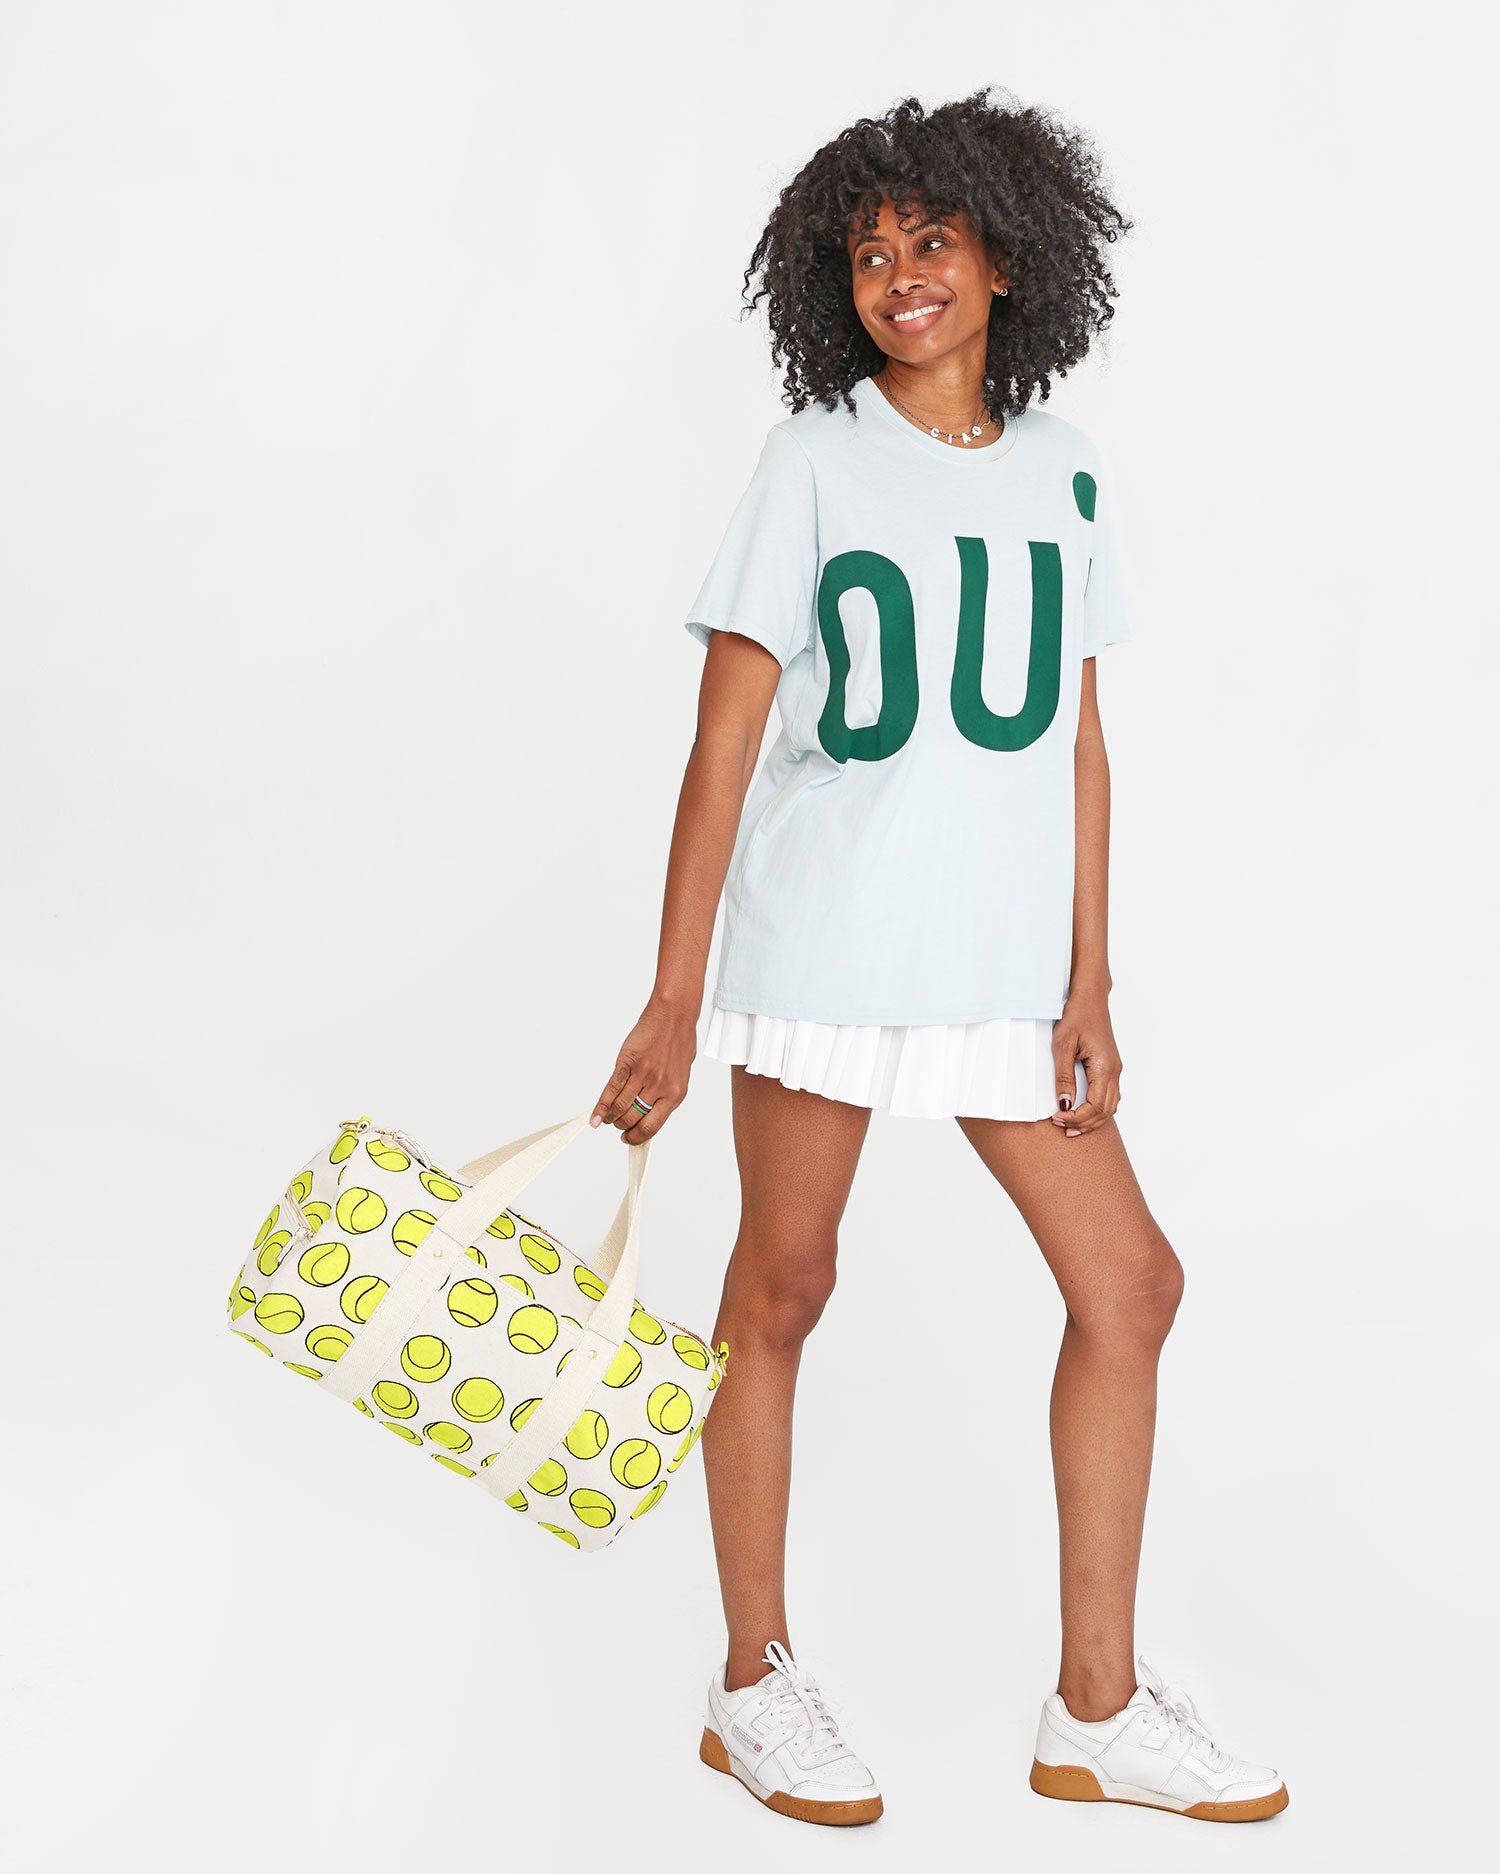 Mecca wearing a white tennis skirt with the sky blue grand oui t shirt . she's carrying the Natural w/ Tennis Balls Duffle